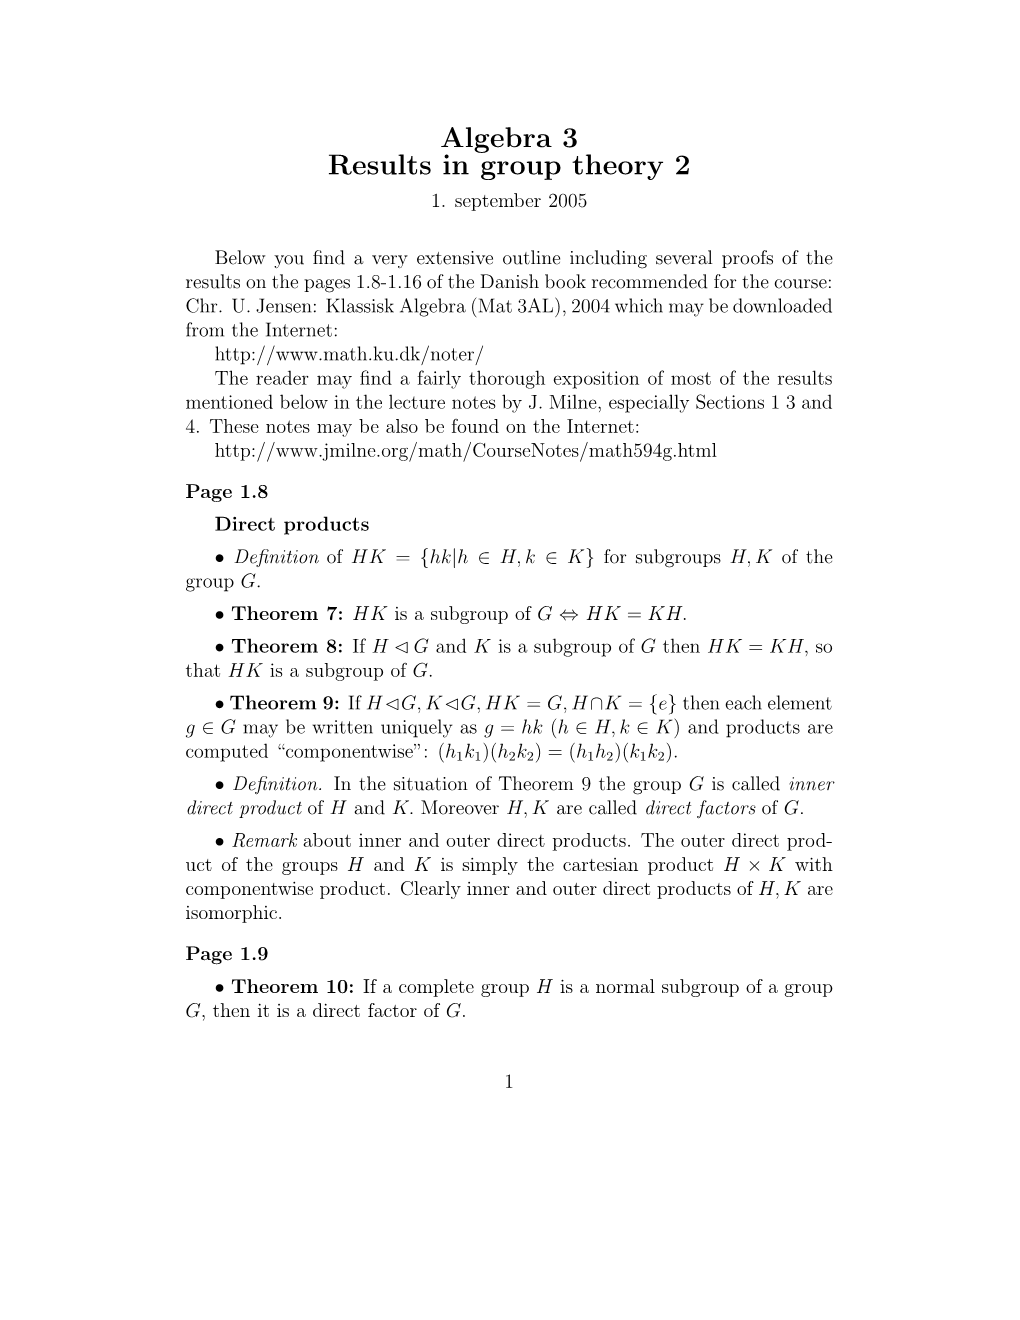 Algebra 3 Results in Group Theory 2 1